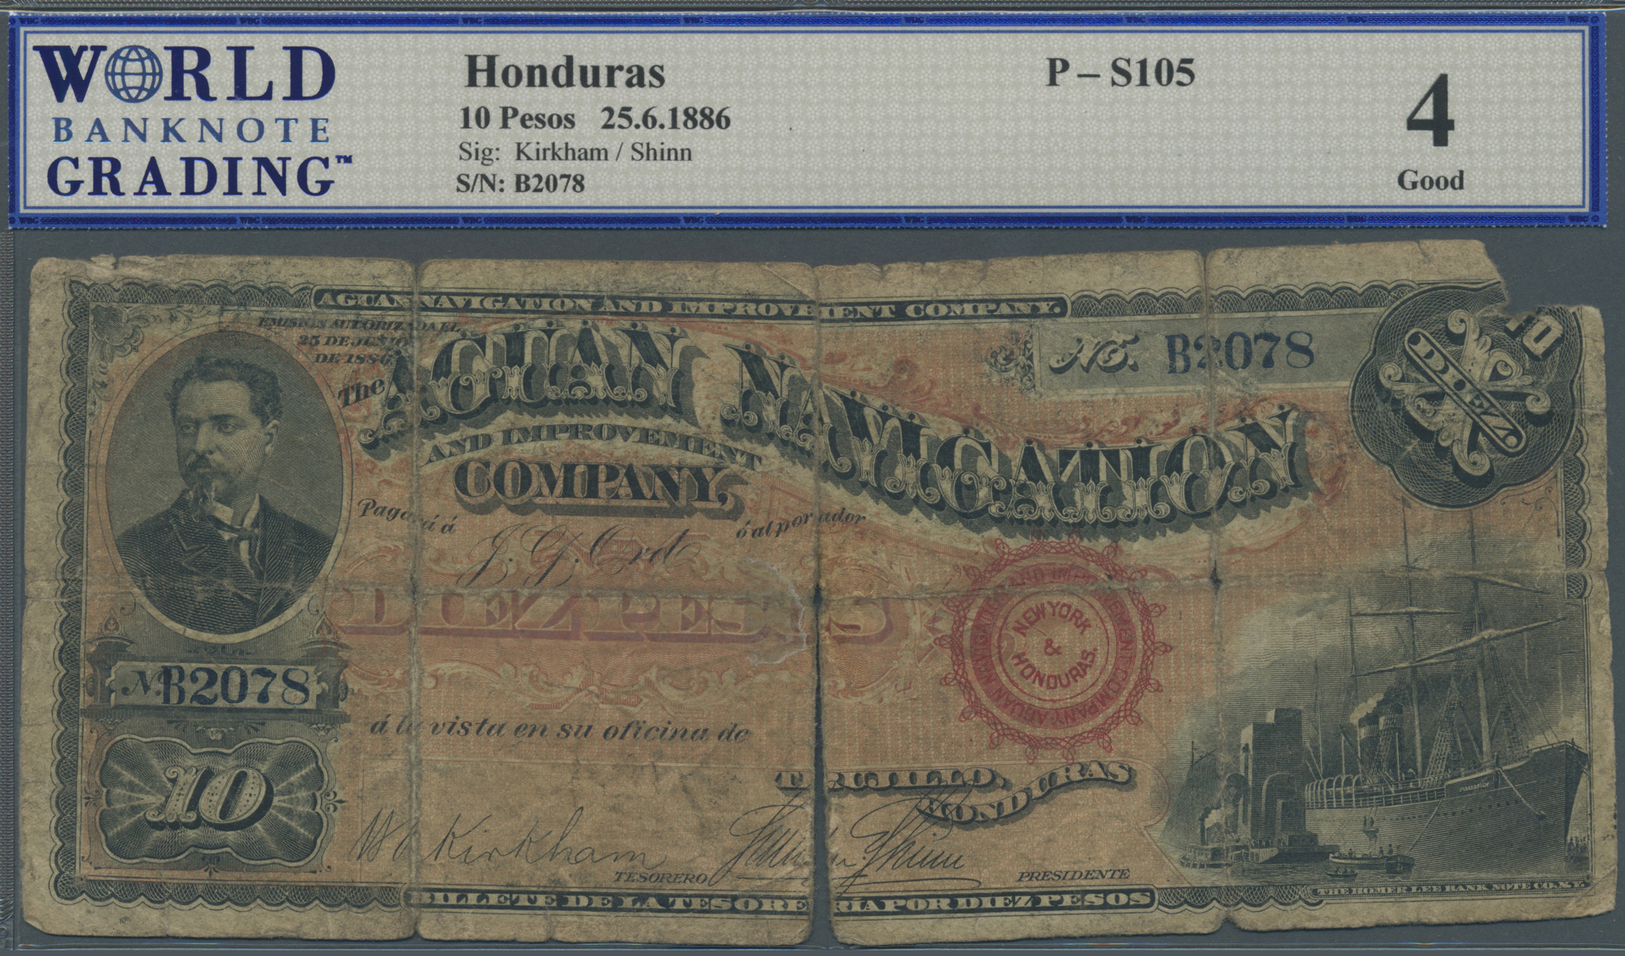 00995 Honduras:  Aguan Navigation And Improvement Company 10 Pesos 1886, P.S105 In Well Worn Condition, Almost Torn Into - Honduras